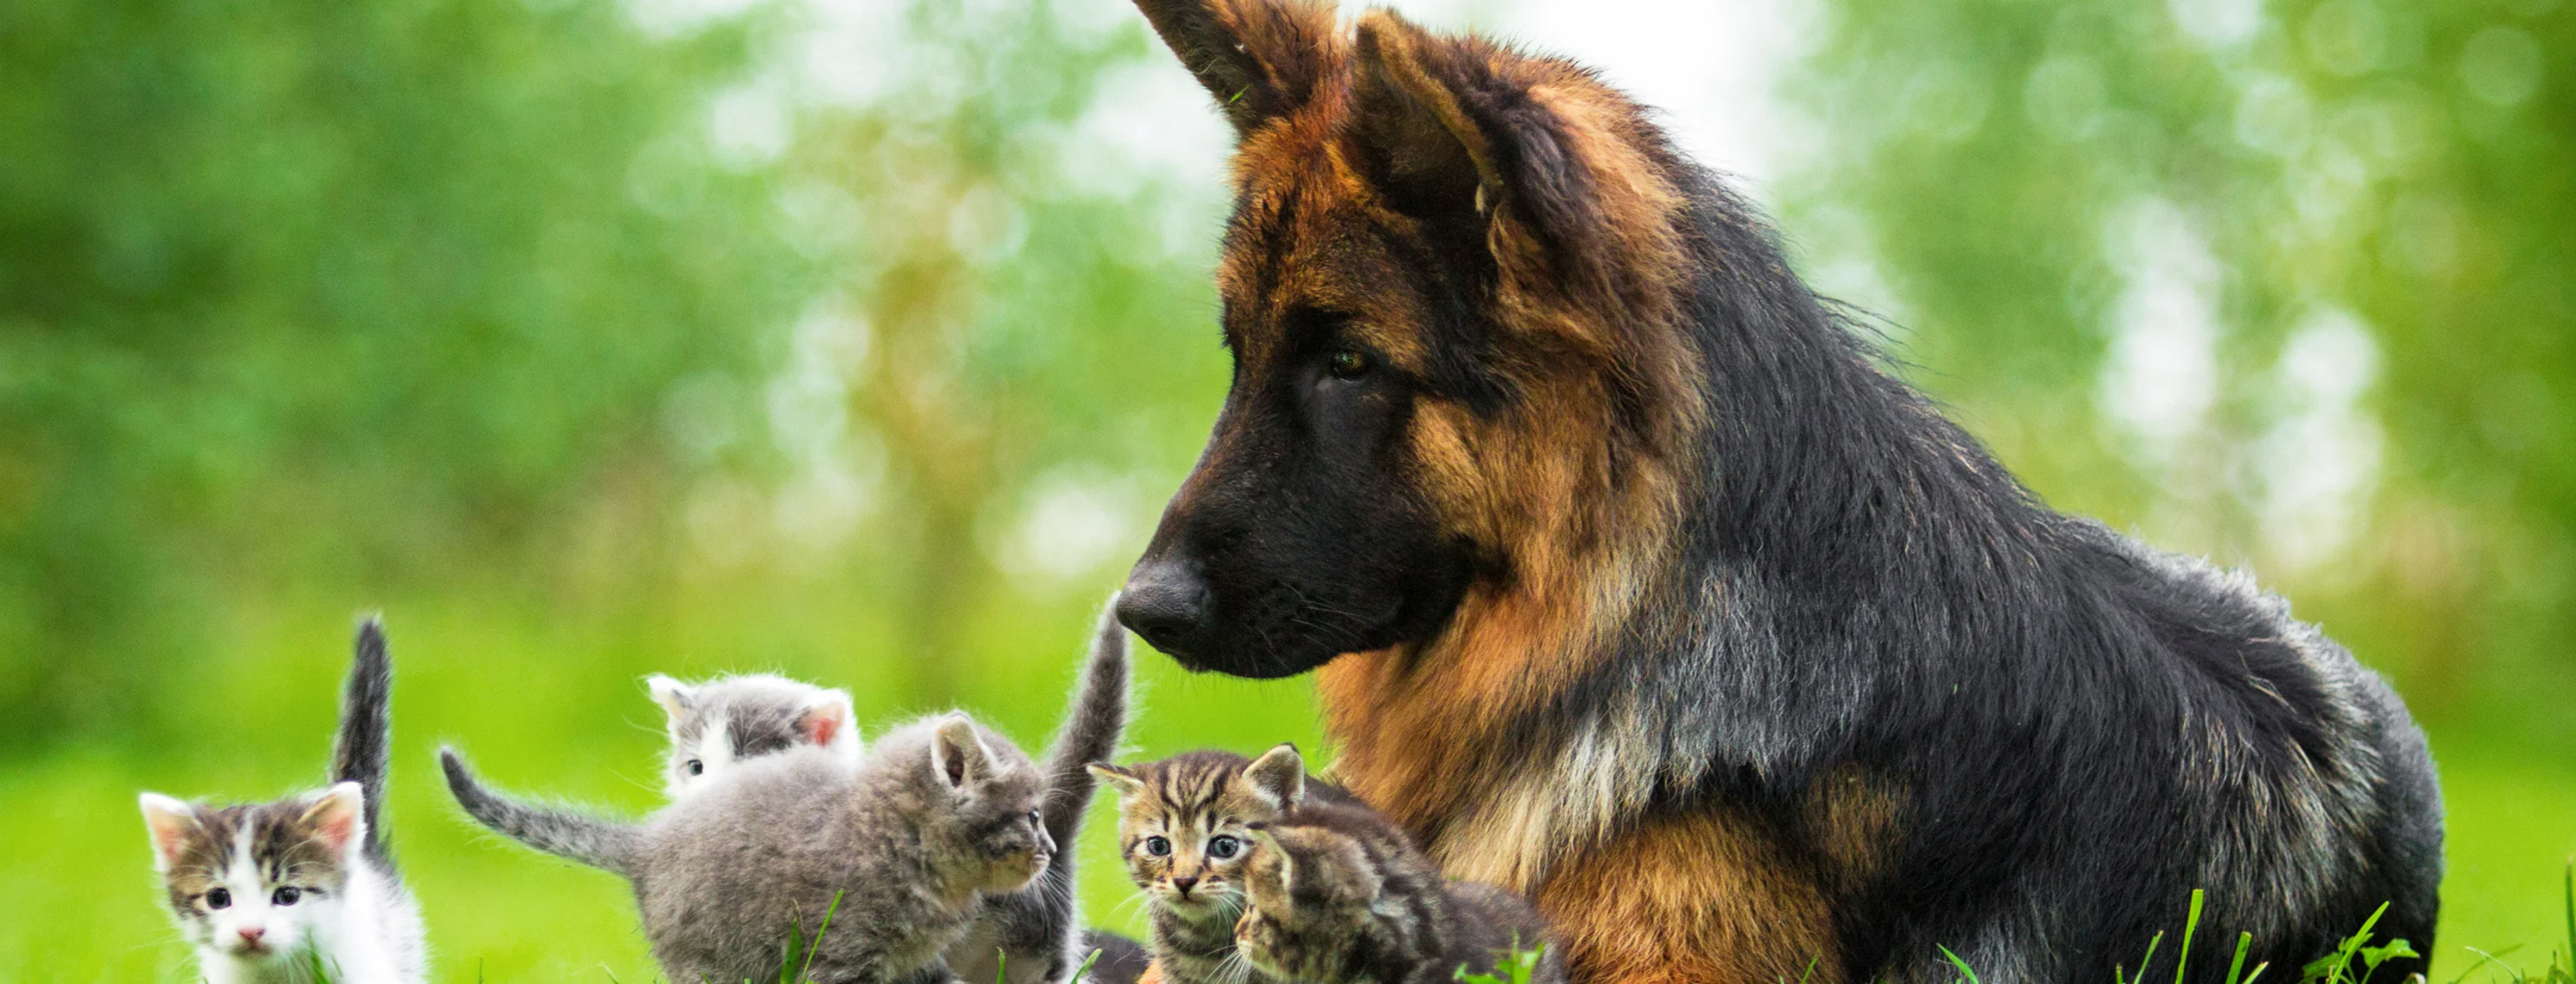 A dog sitting outside in the grass with several kittens